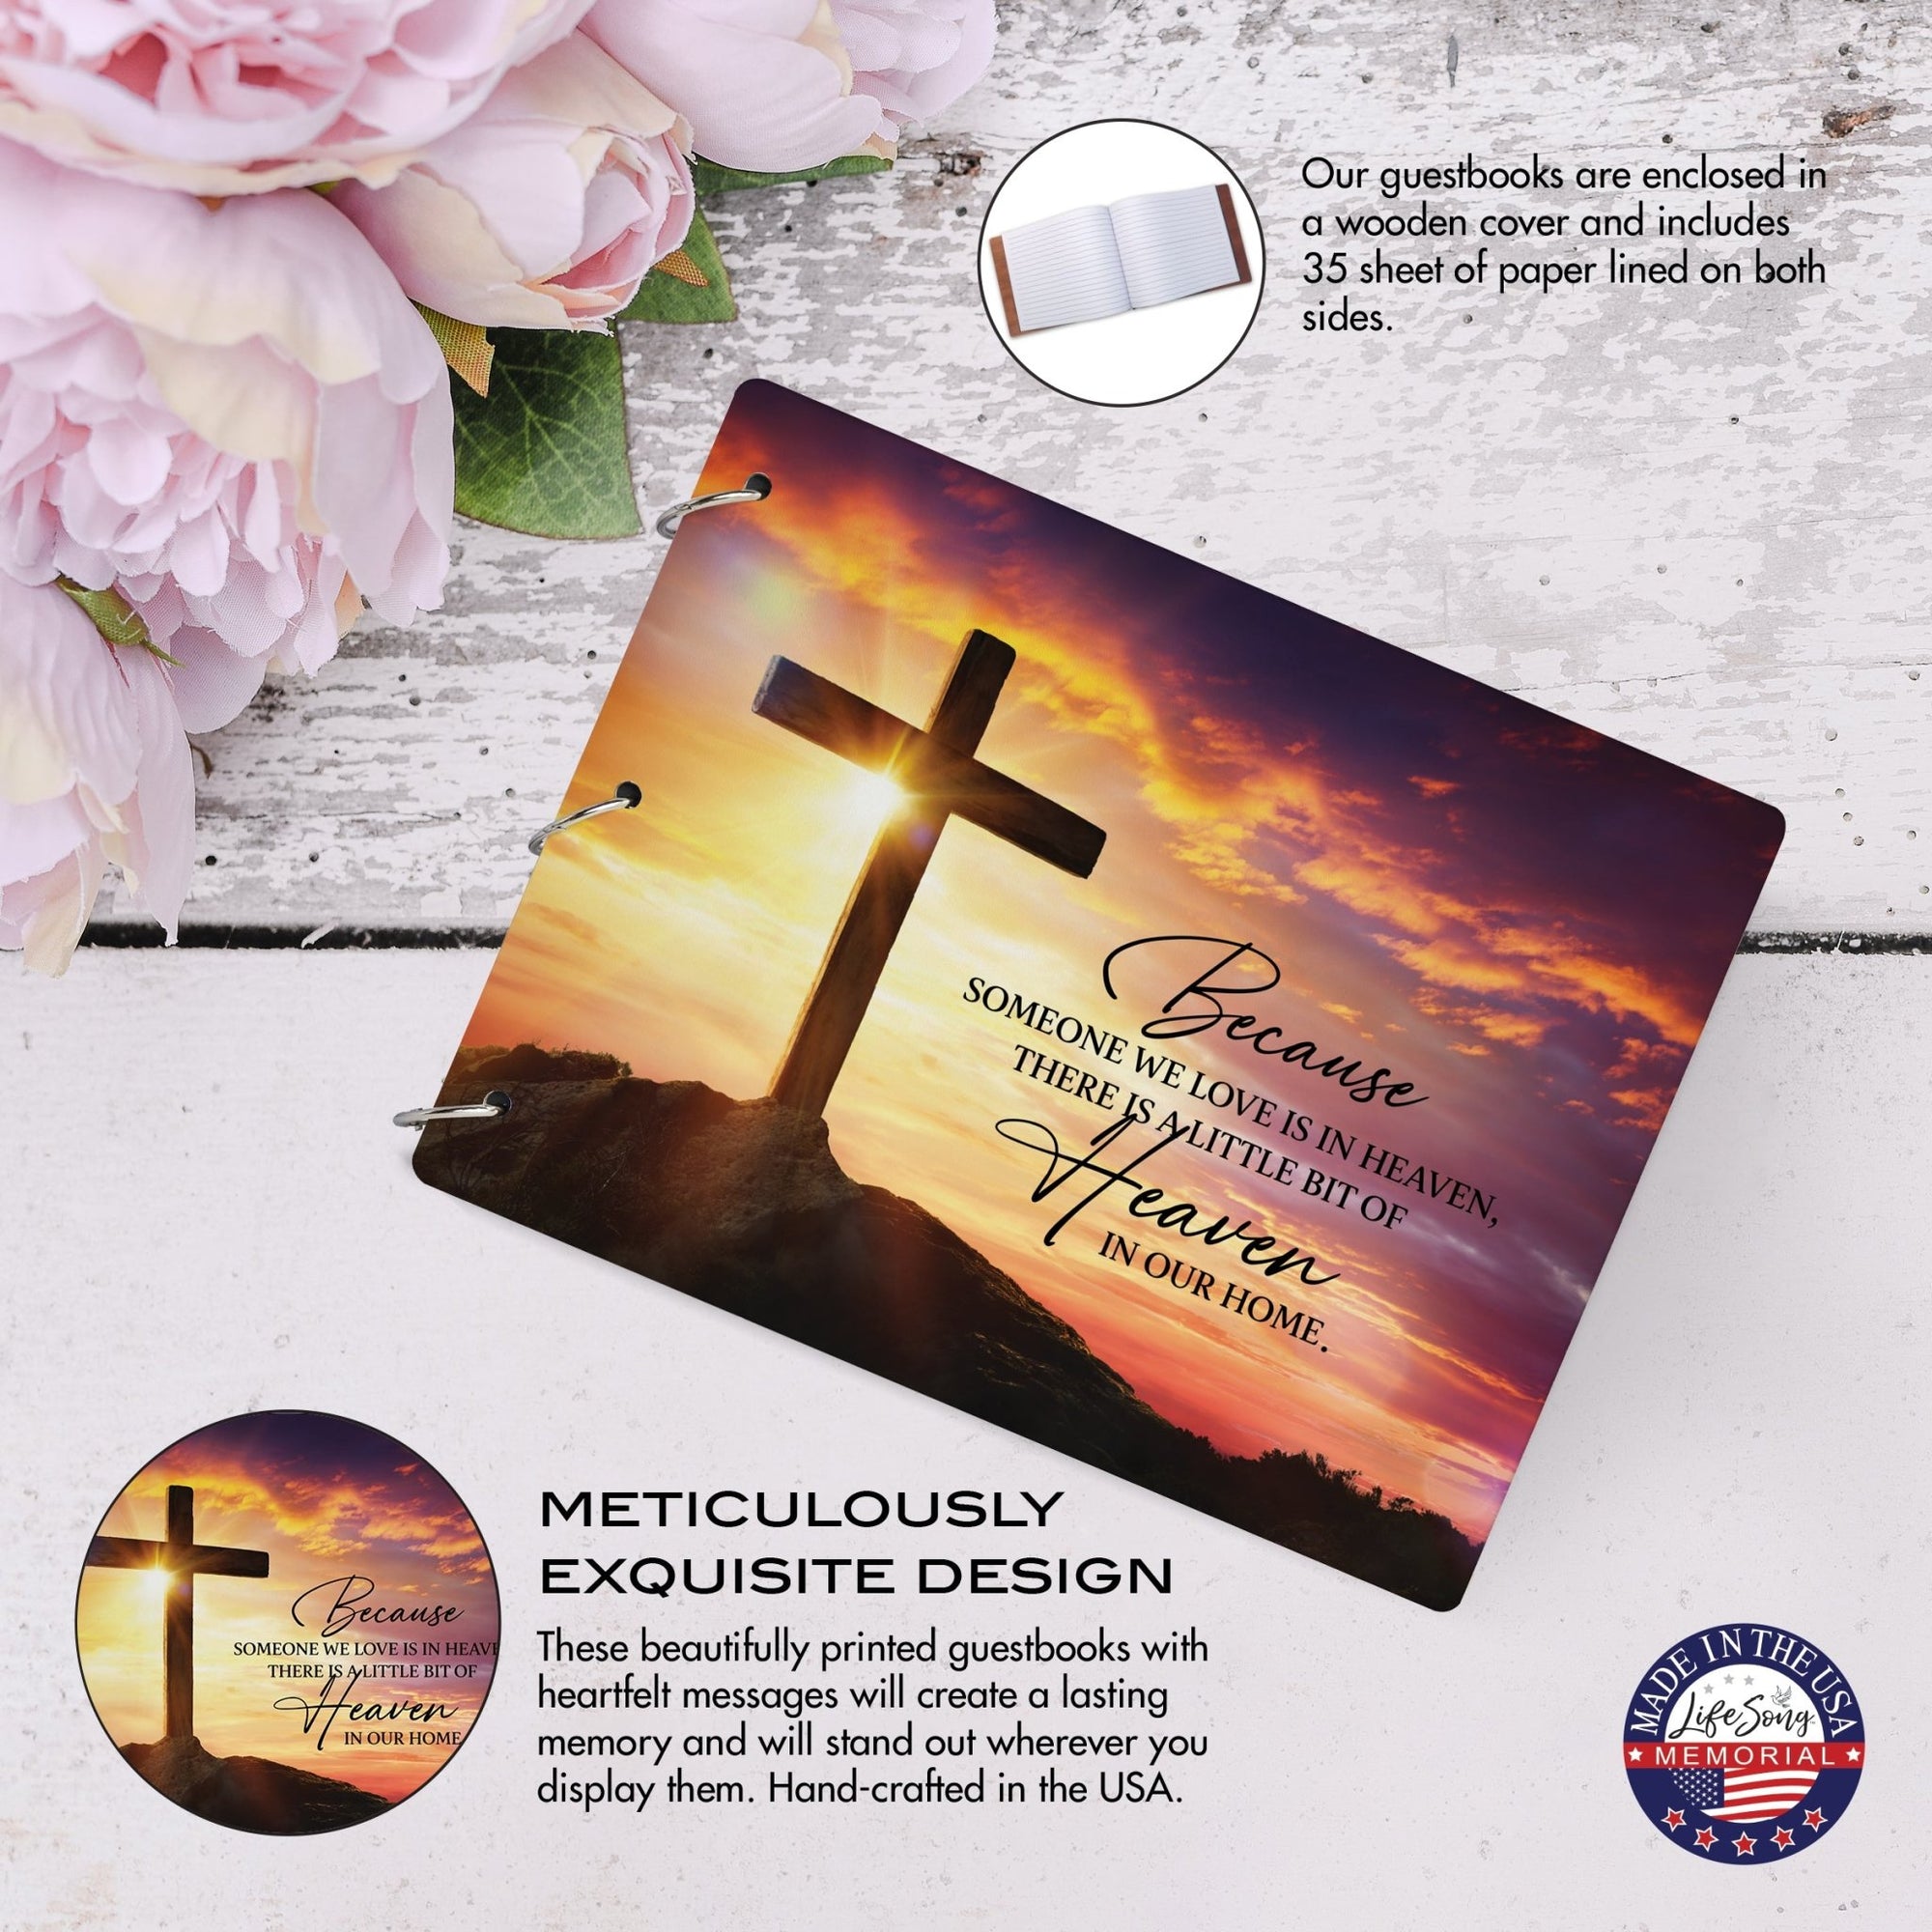 Celebration Of Life Funeral Guest Books For Memorial Services Registry With Wooden Cover - Because Someone We Love - LifeSong Milestones